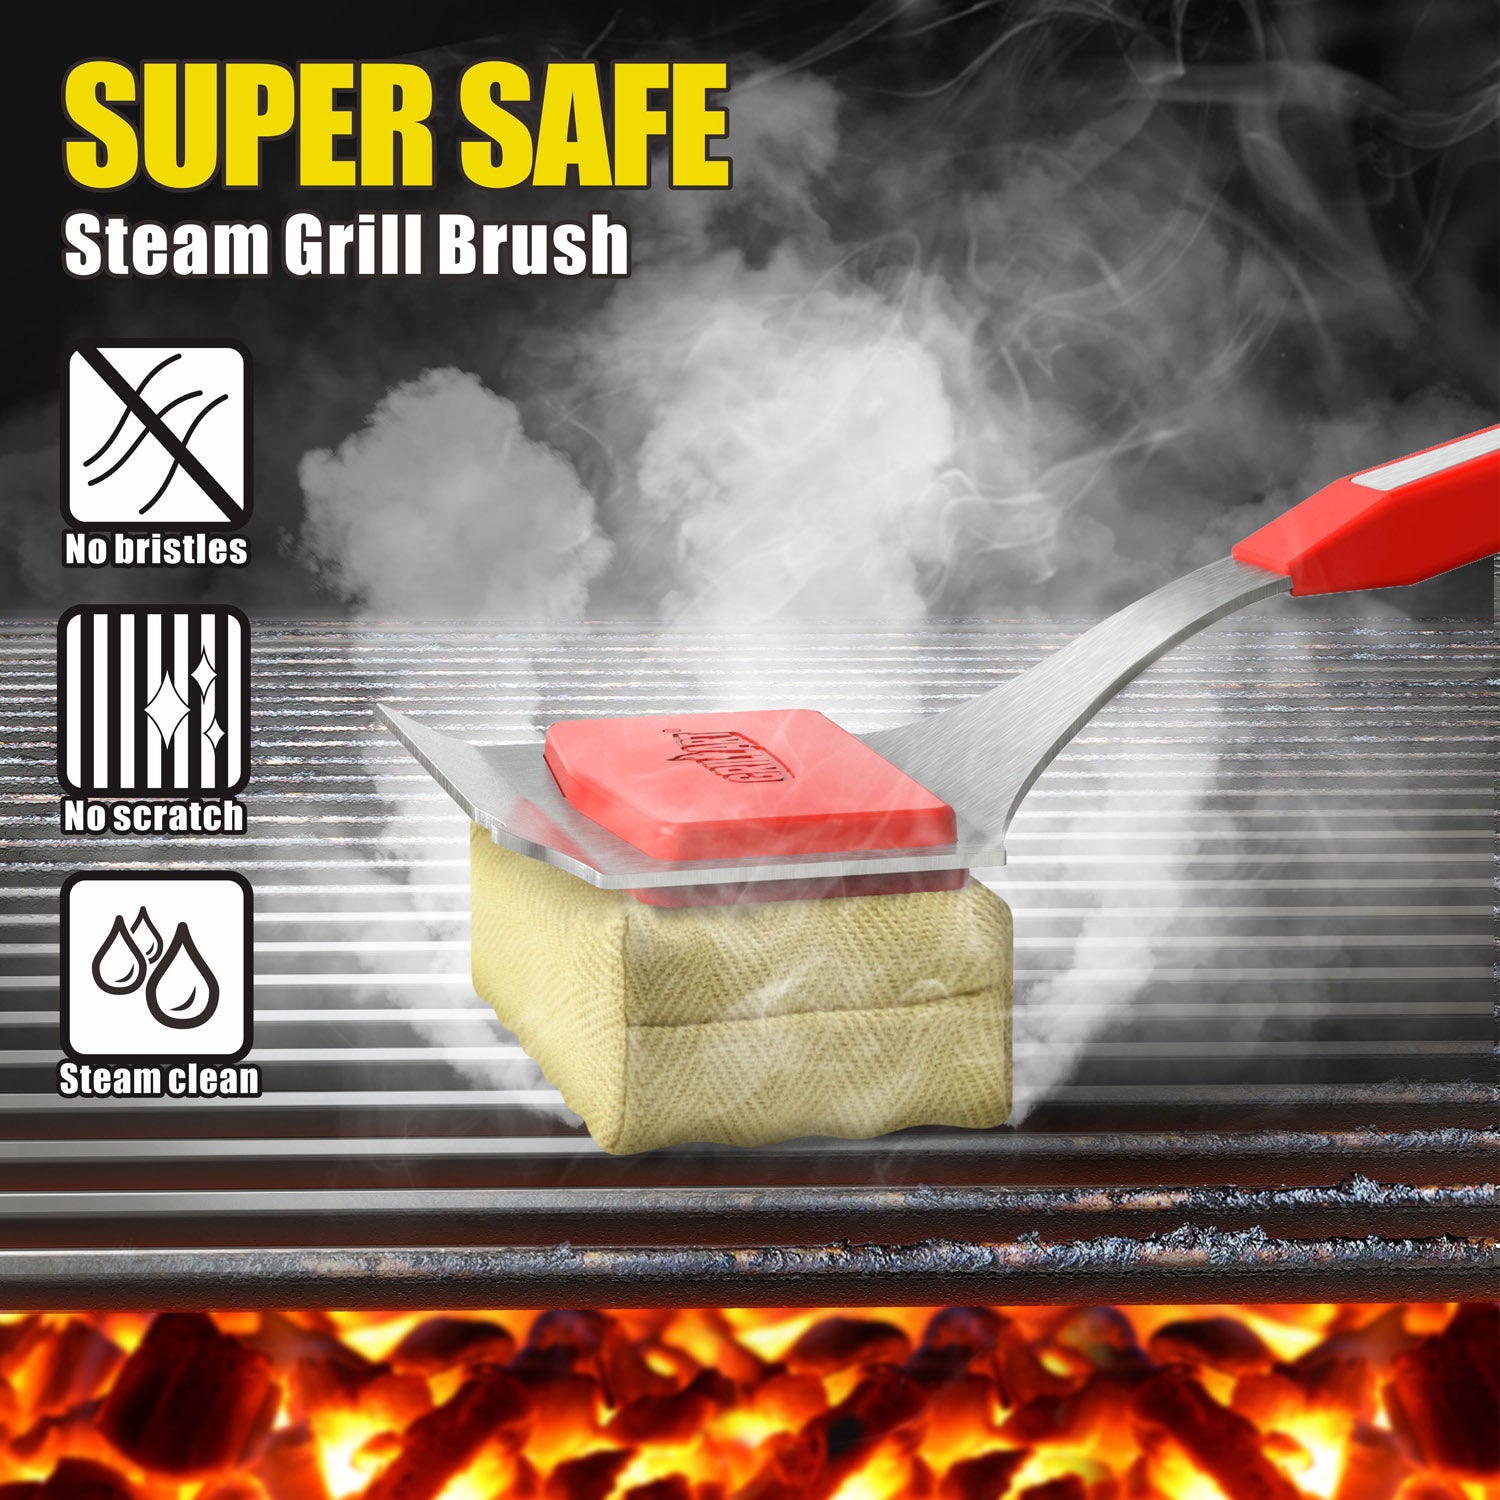 Grill Brush for Outdoor Grill Bristle Free - Heavy Duty 18 Grill Cleaner  Brush Bristle Free & Grill Scraper - Stainless Steel Grill Accessories  Tools